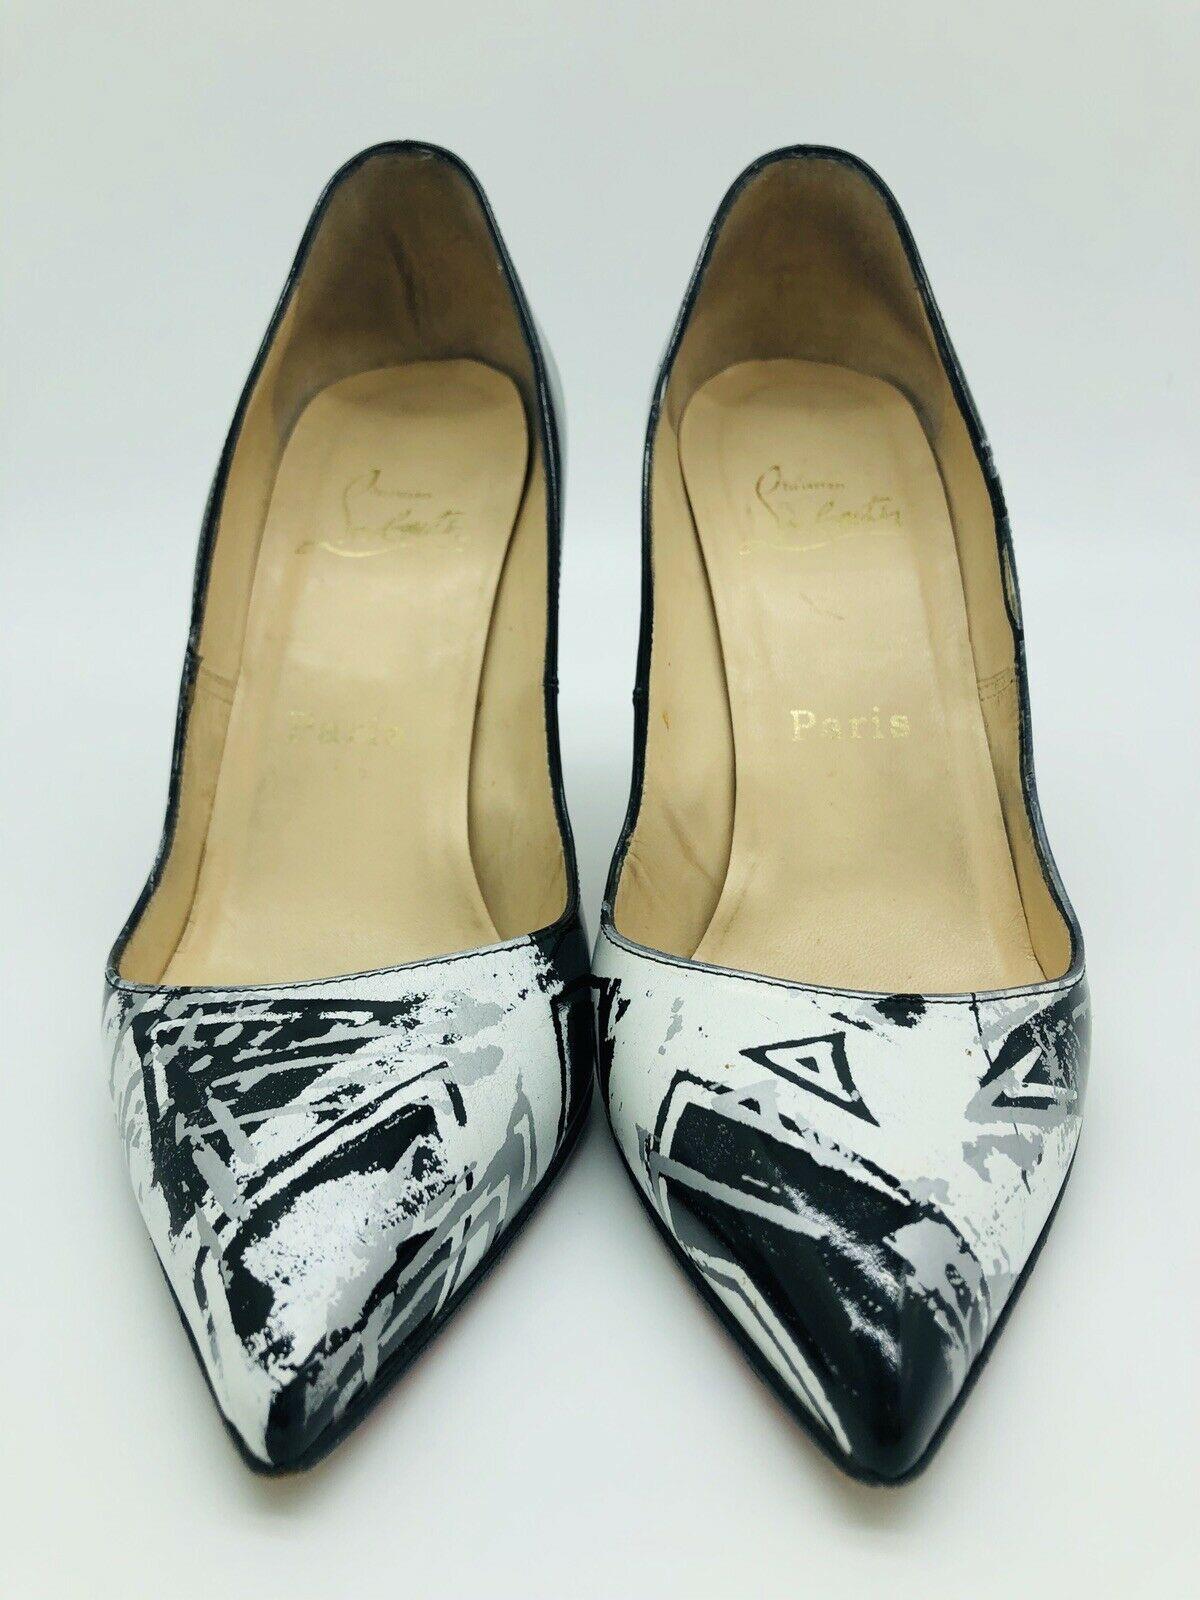 Womens Designer Christian Louboutin Patent Heeled Pumps Black/White - 37.5 In Good Condition For Sale In London, GB